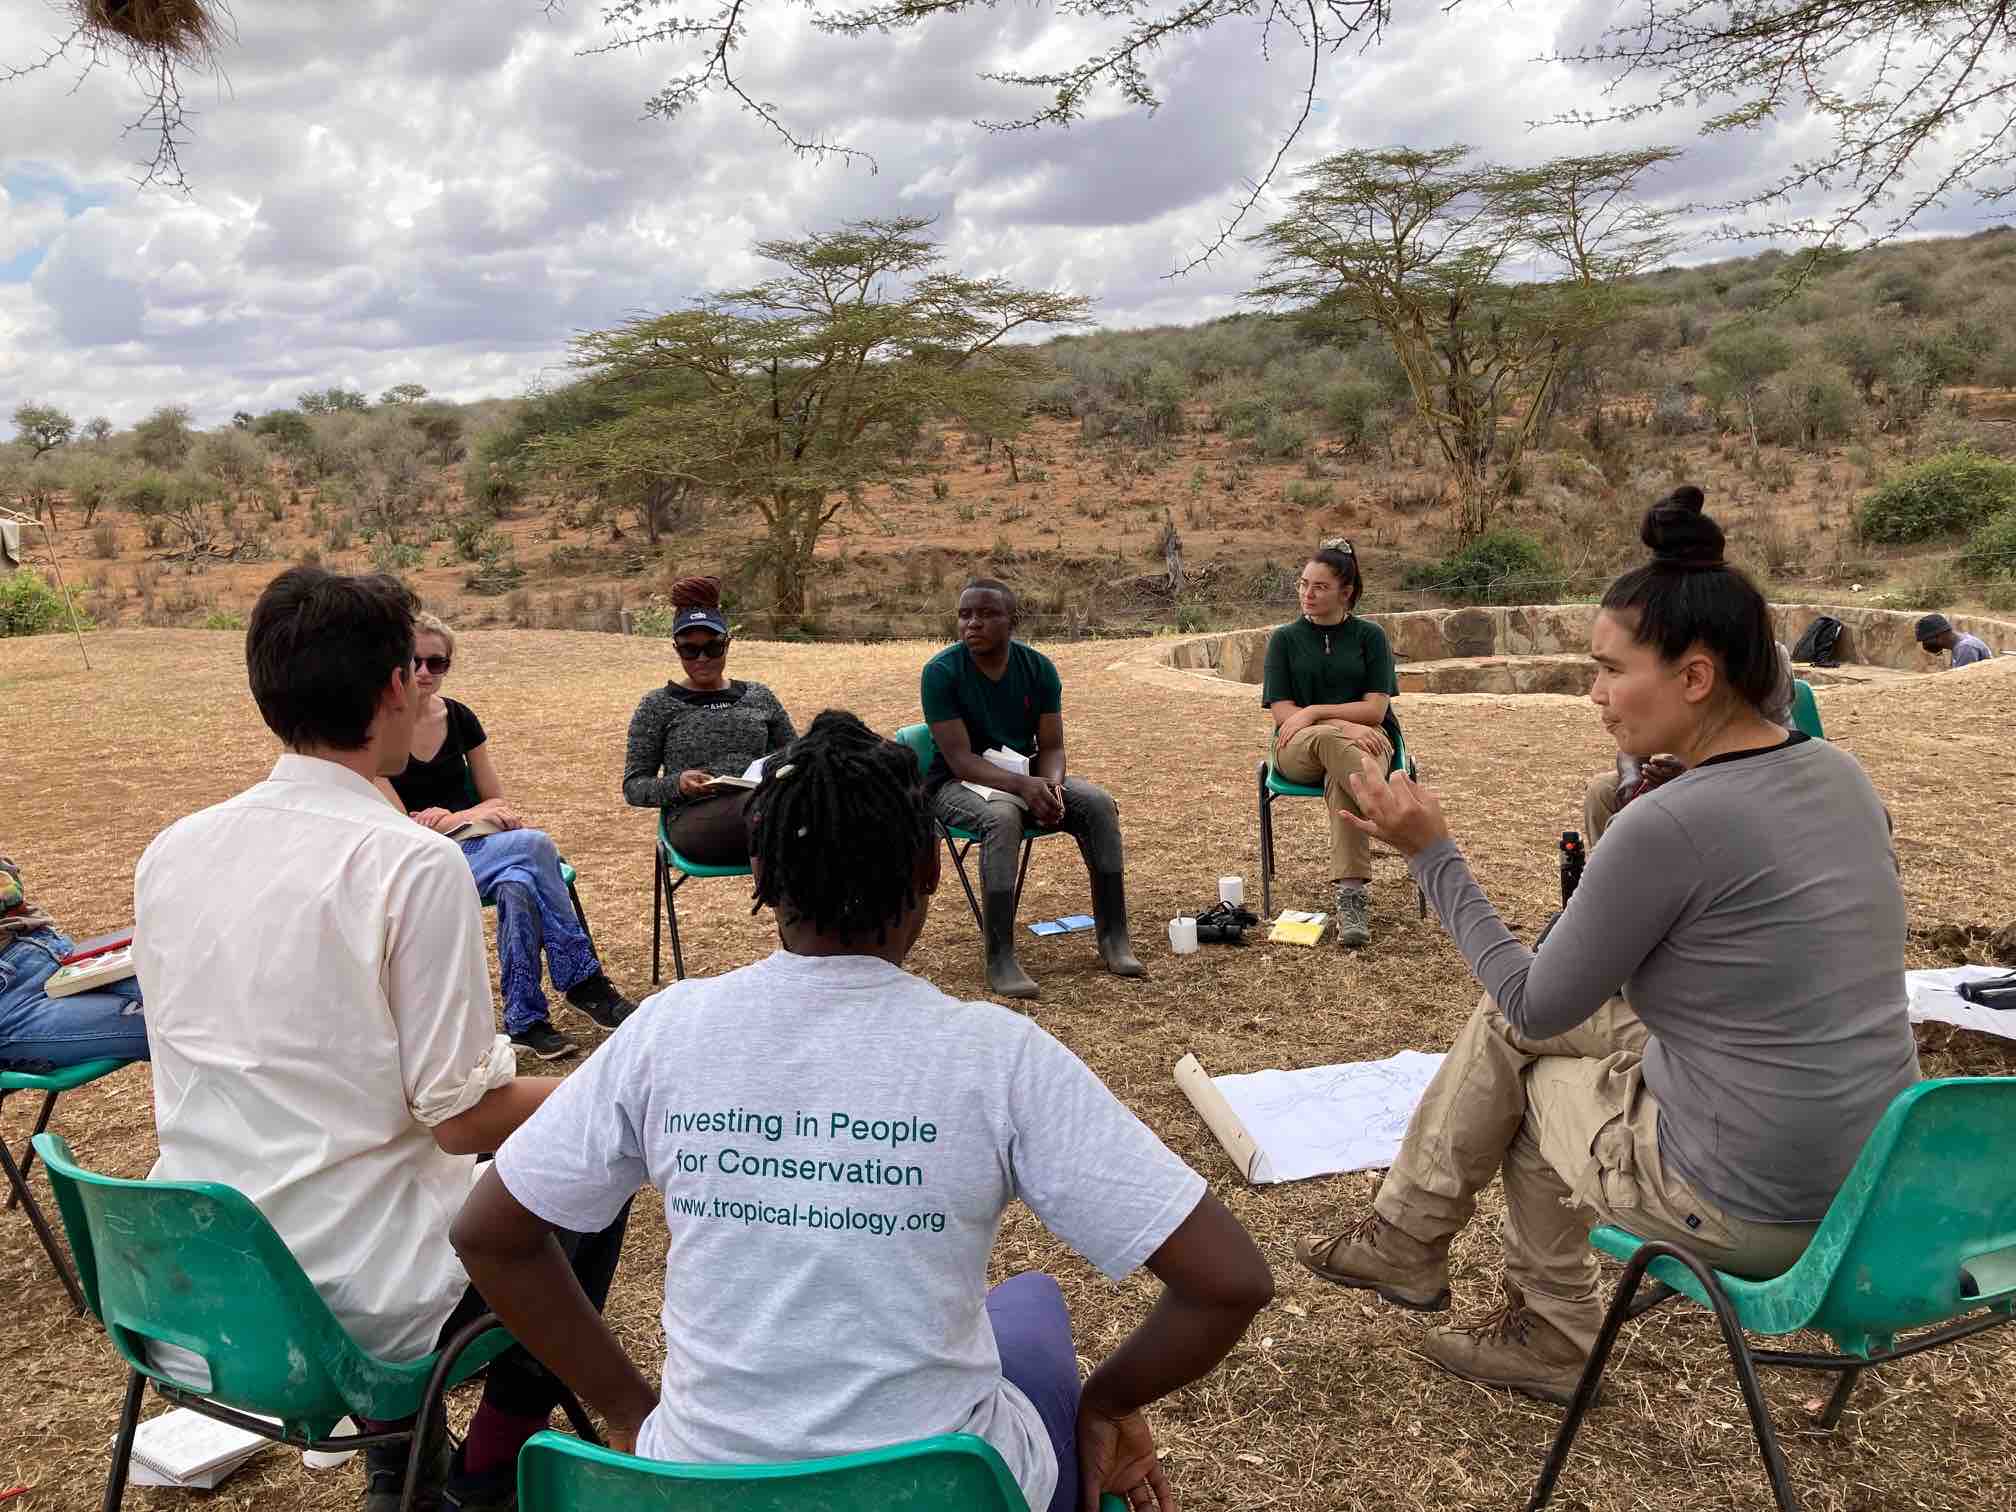 Participants studying under an Acacia tree